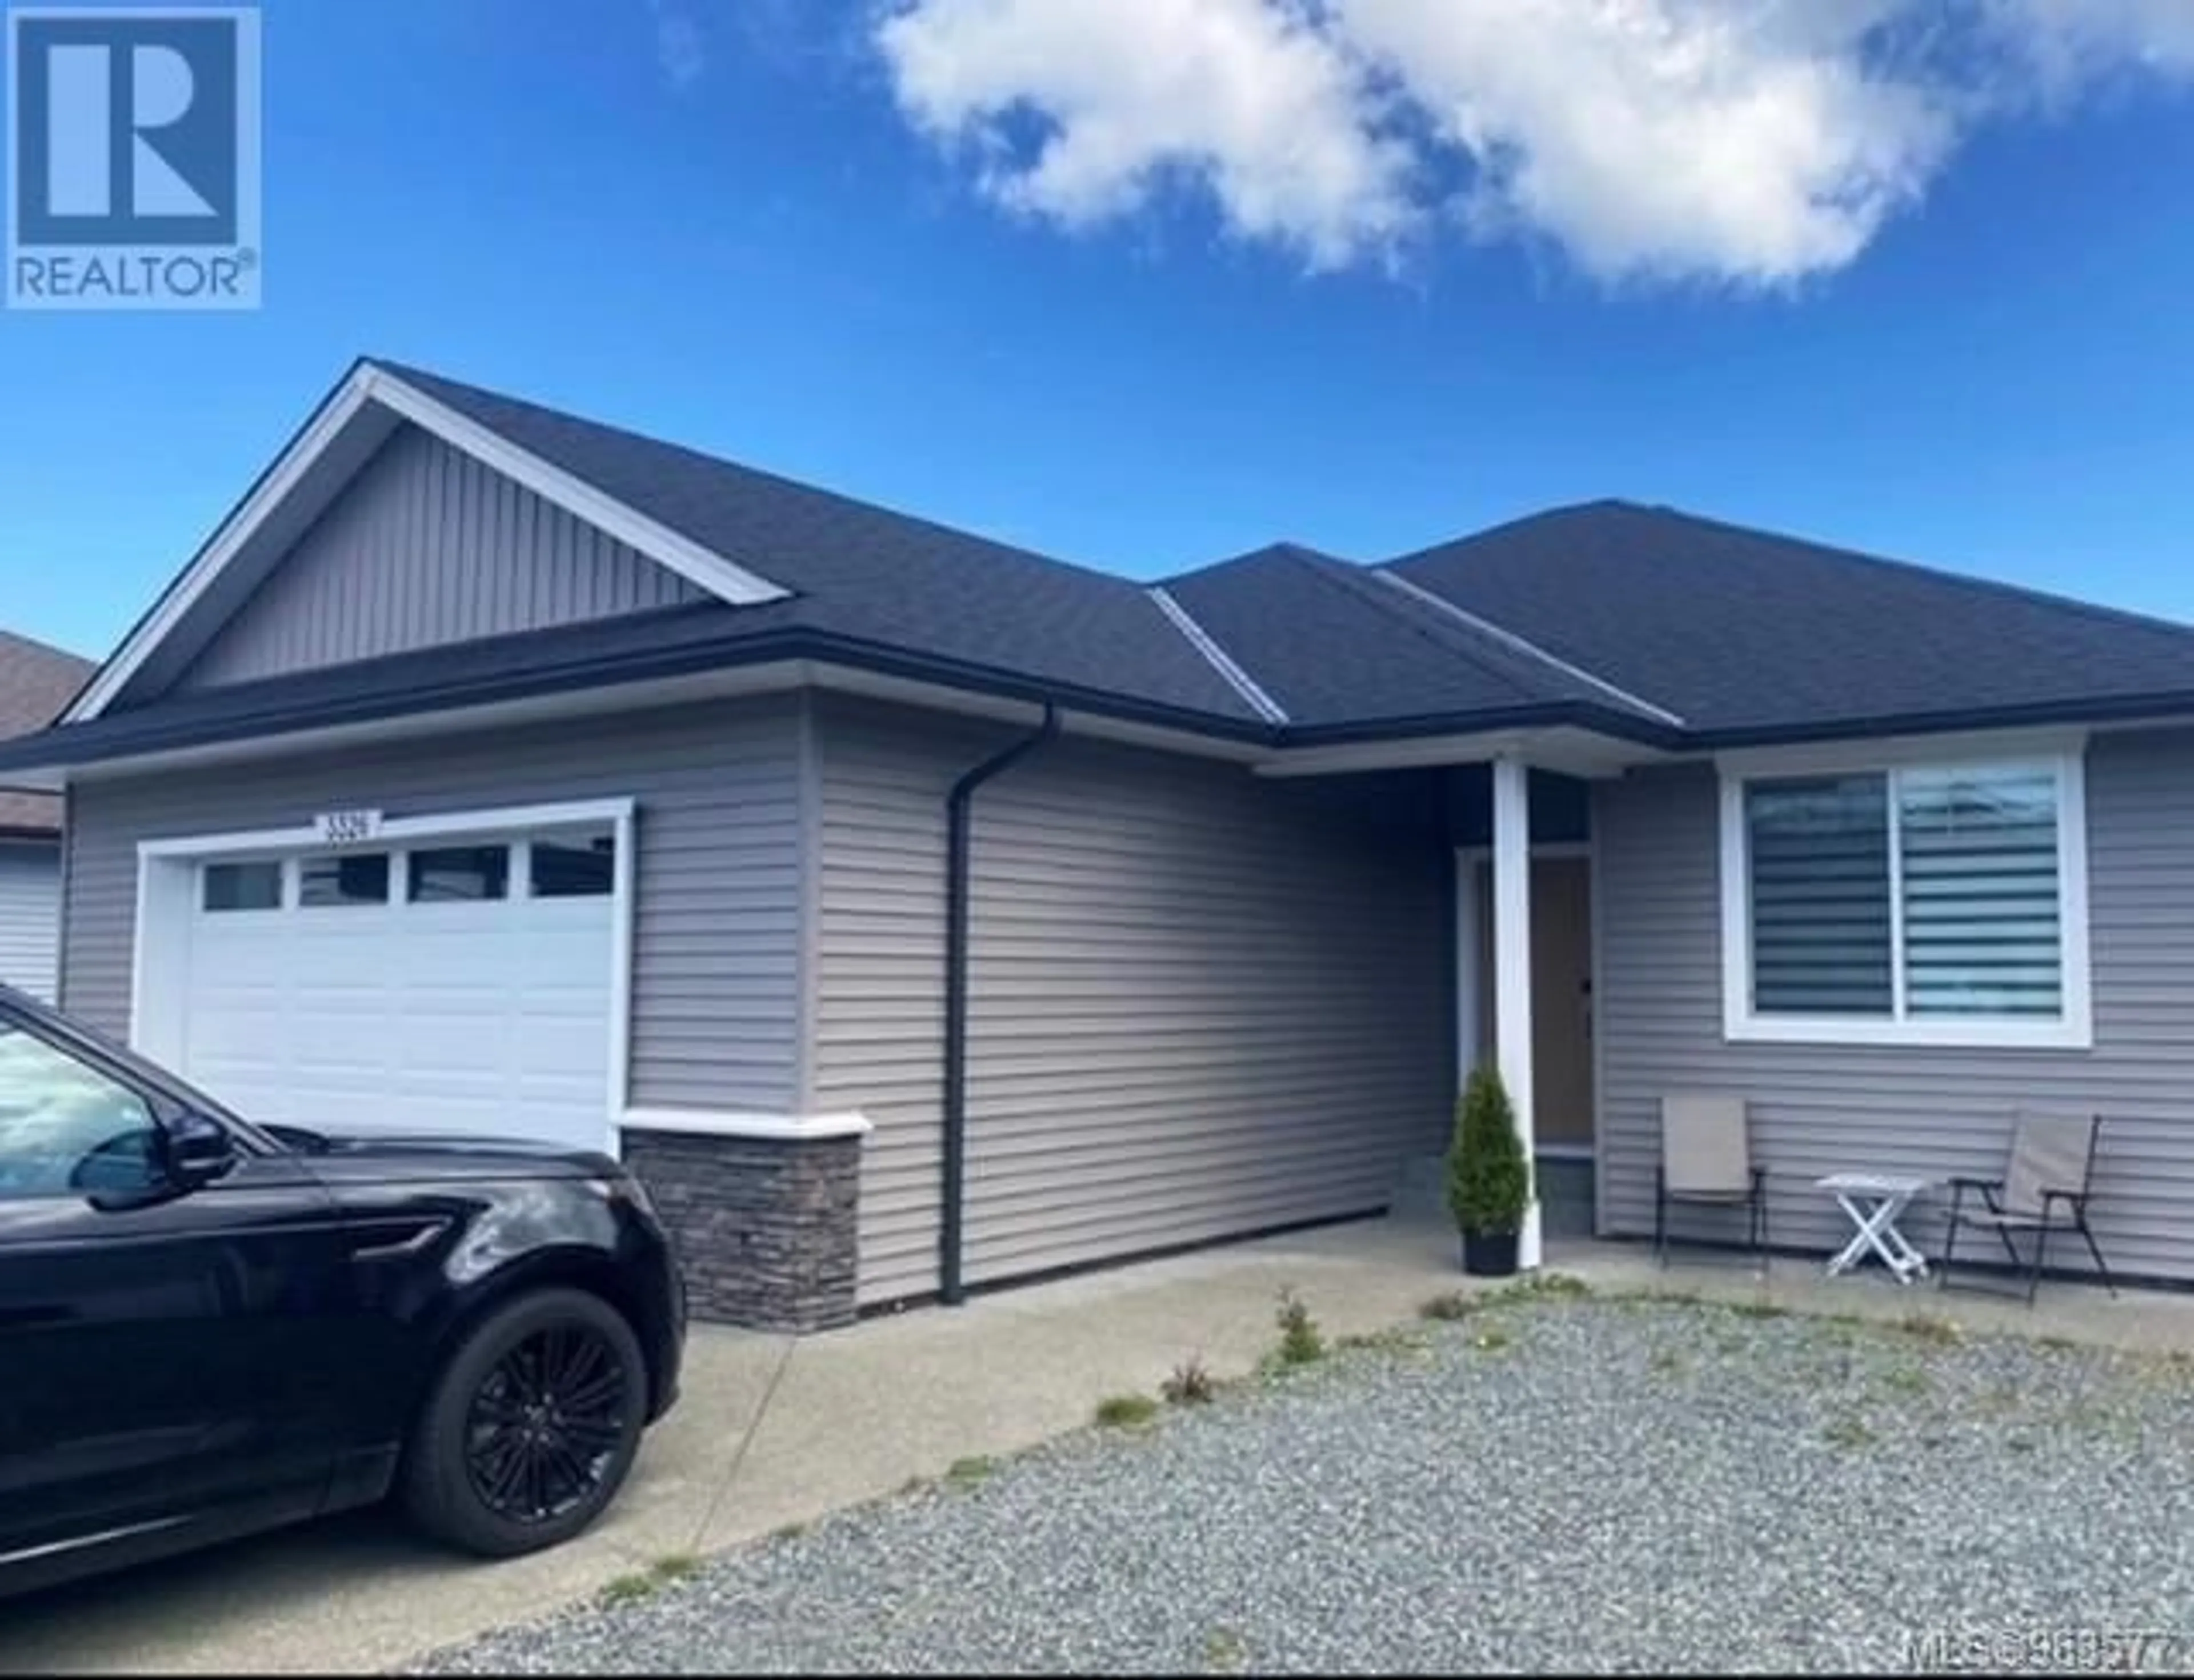 Frontside or backside of a home for 3326 Solport St, Cumberland British Columbia V0R1S0